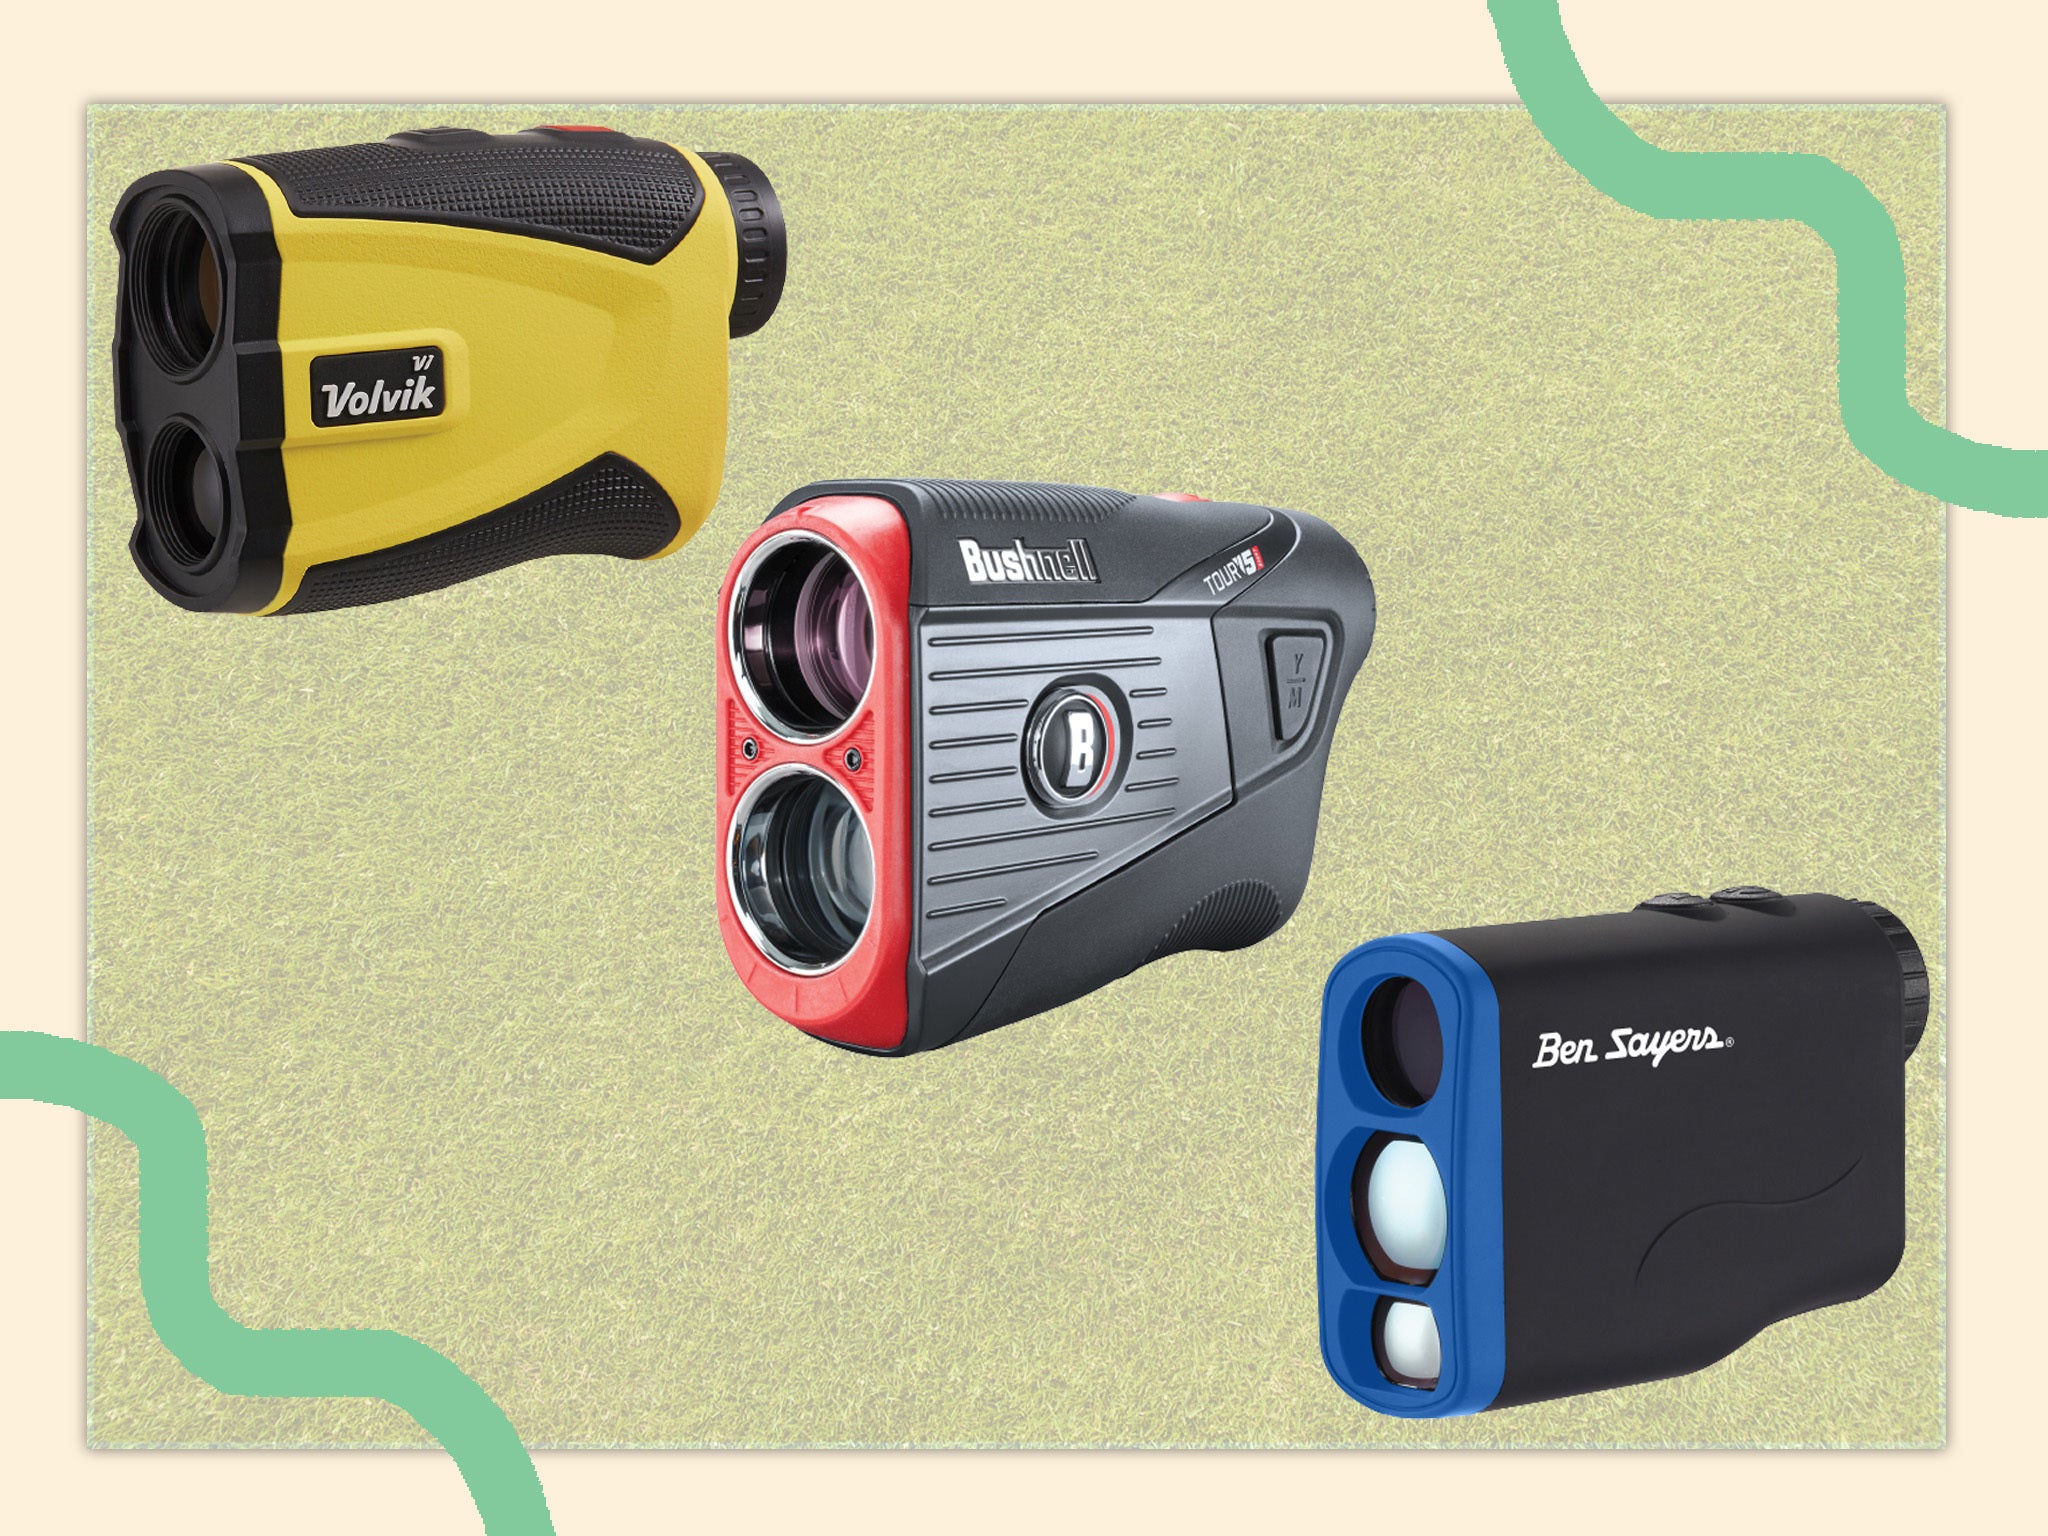 8 best golf rangefinders to help you ace your game, from GPS to laser models